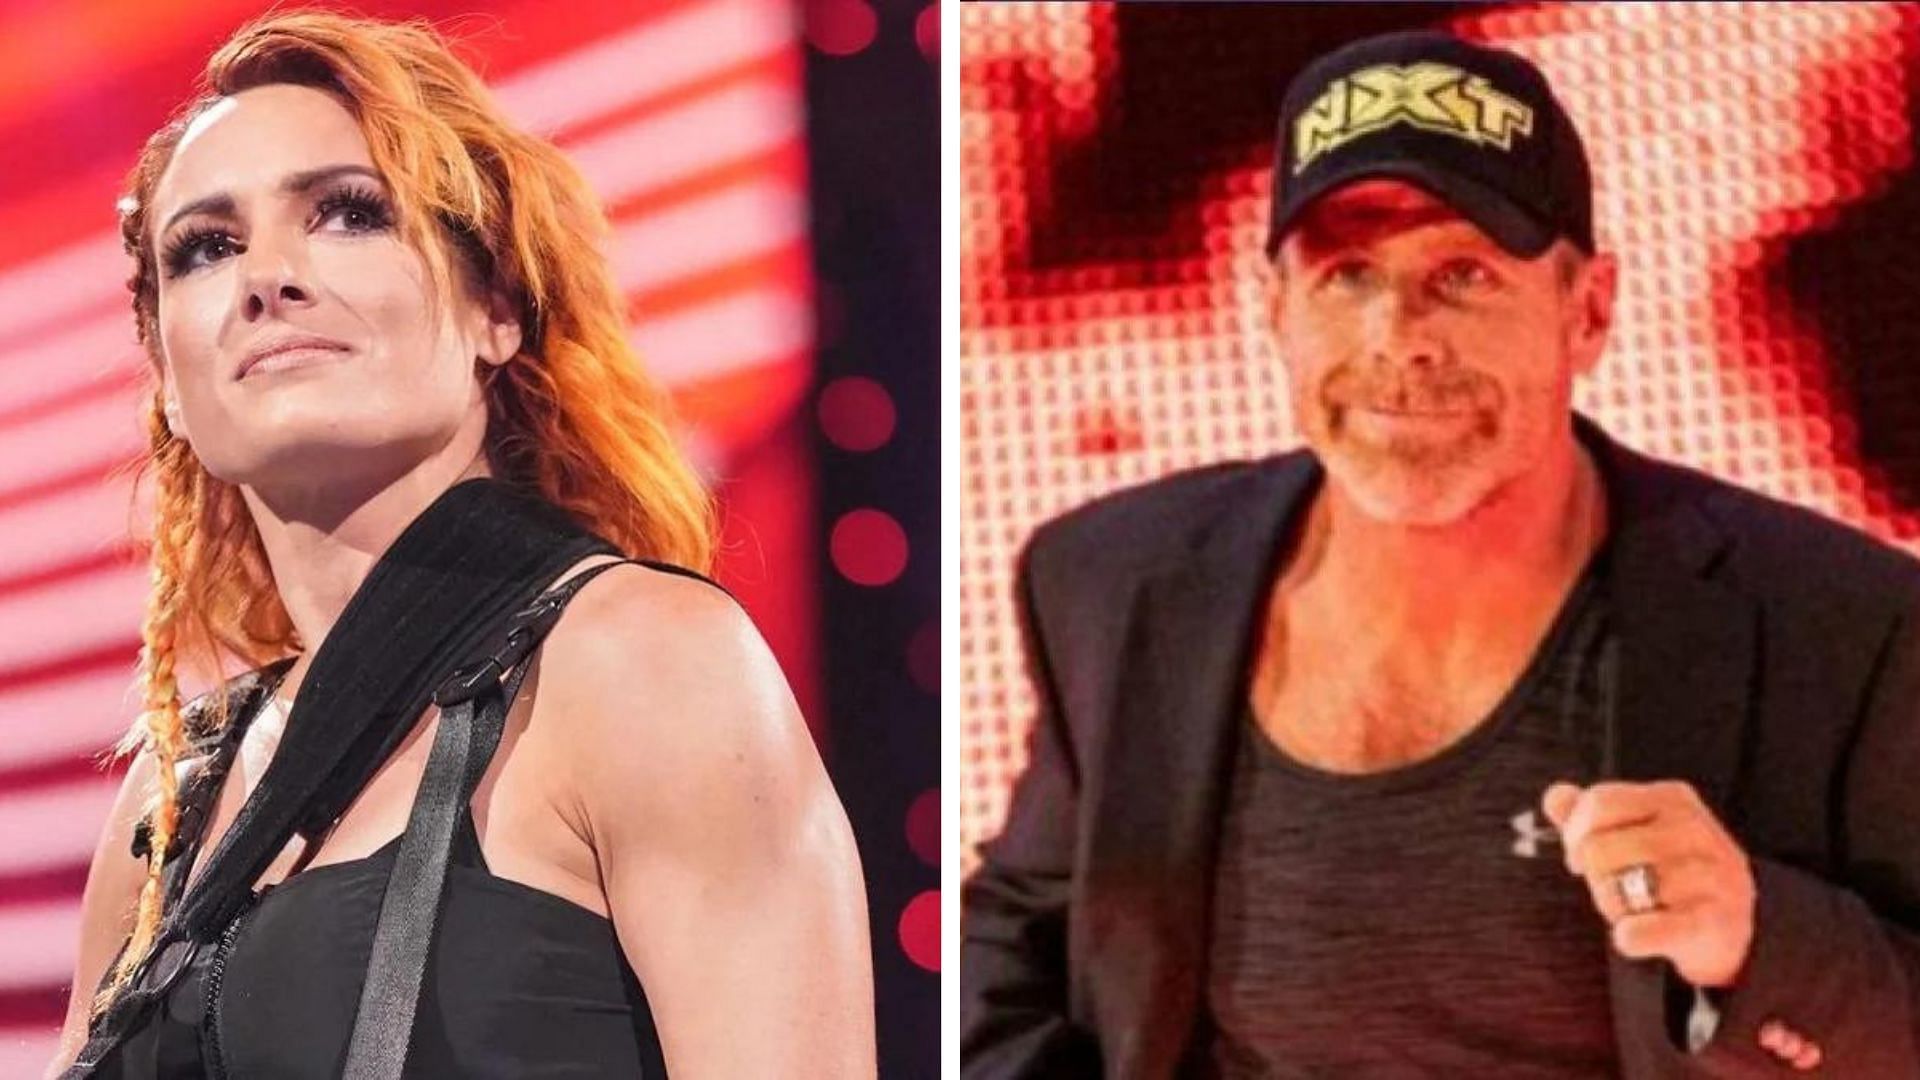 Becky Lynch on the left, Shawn Michaels on the right